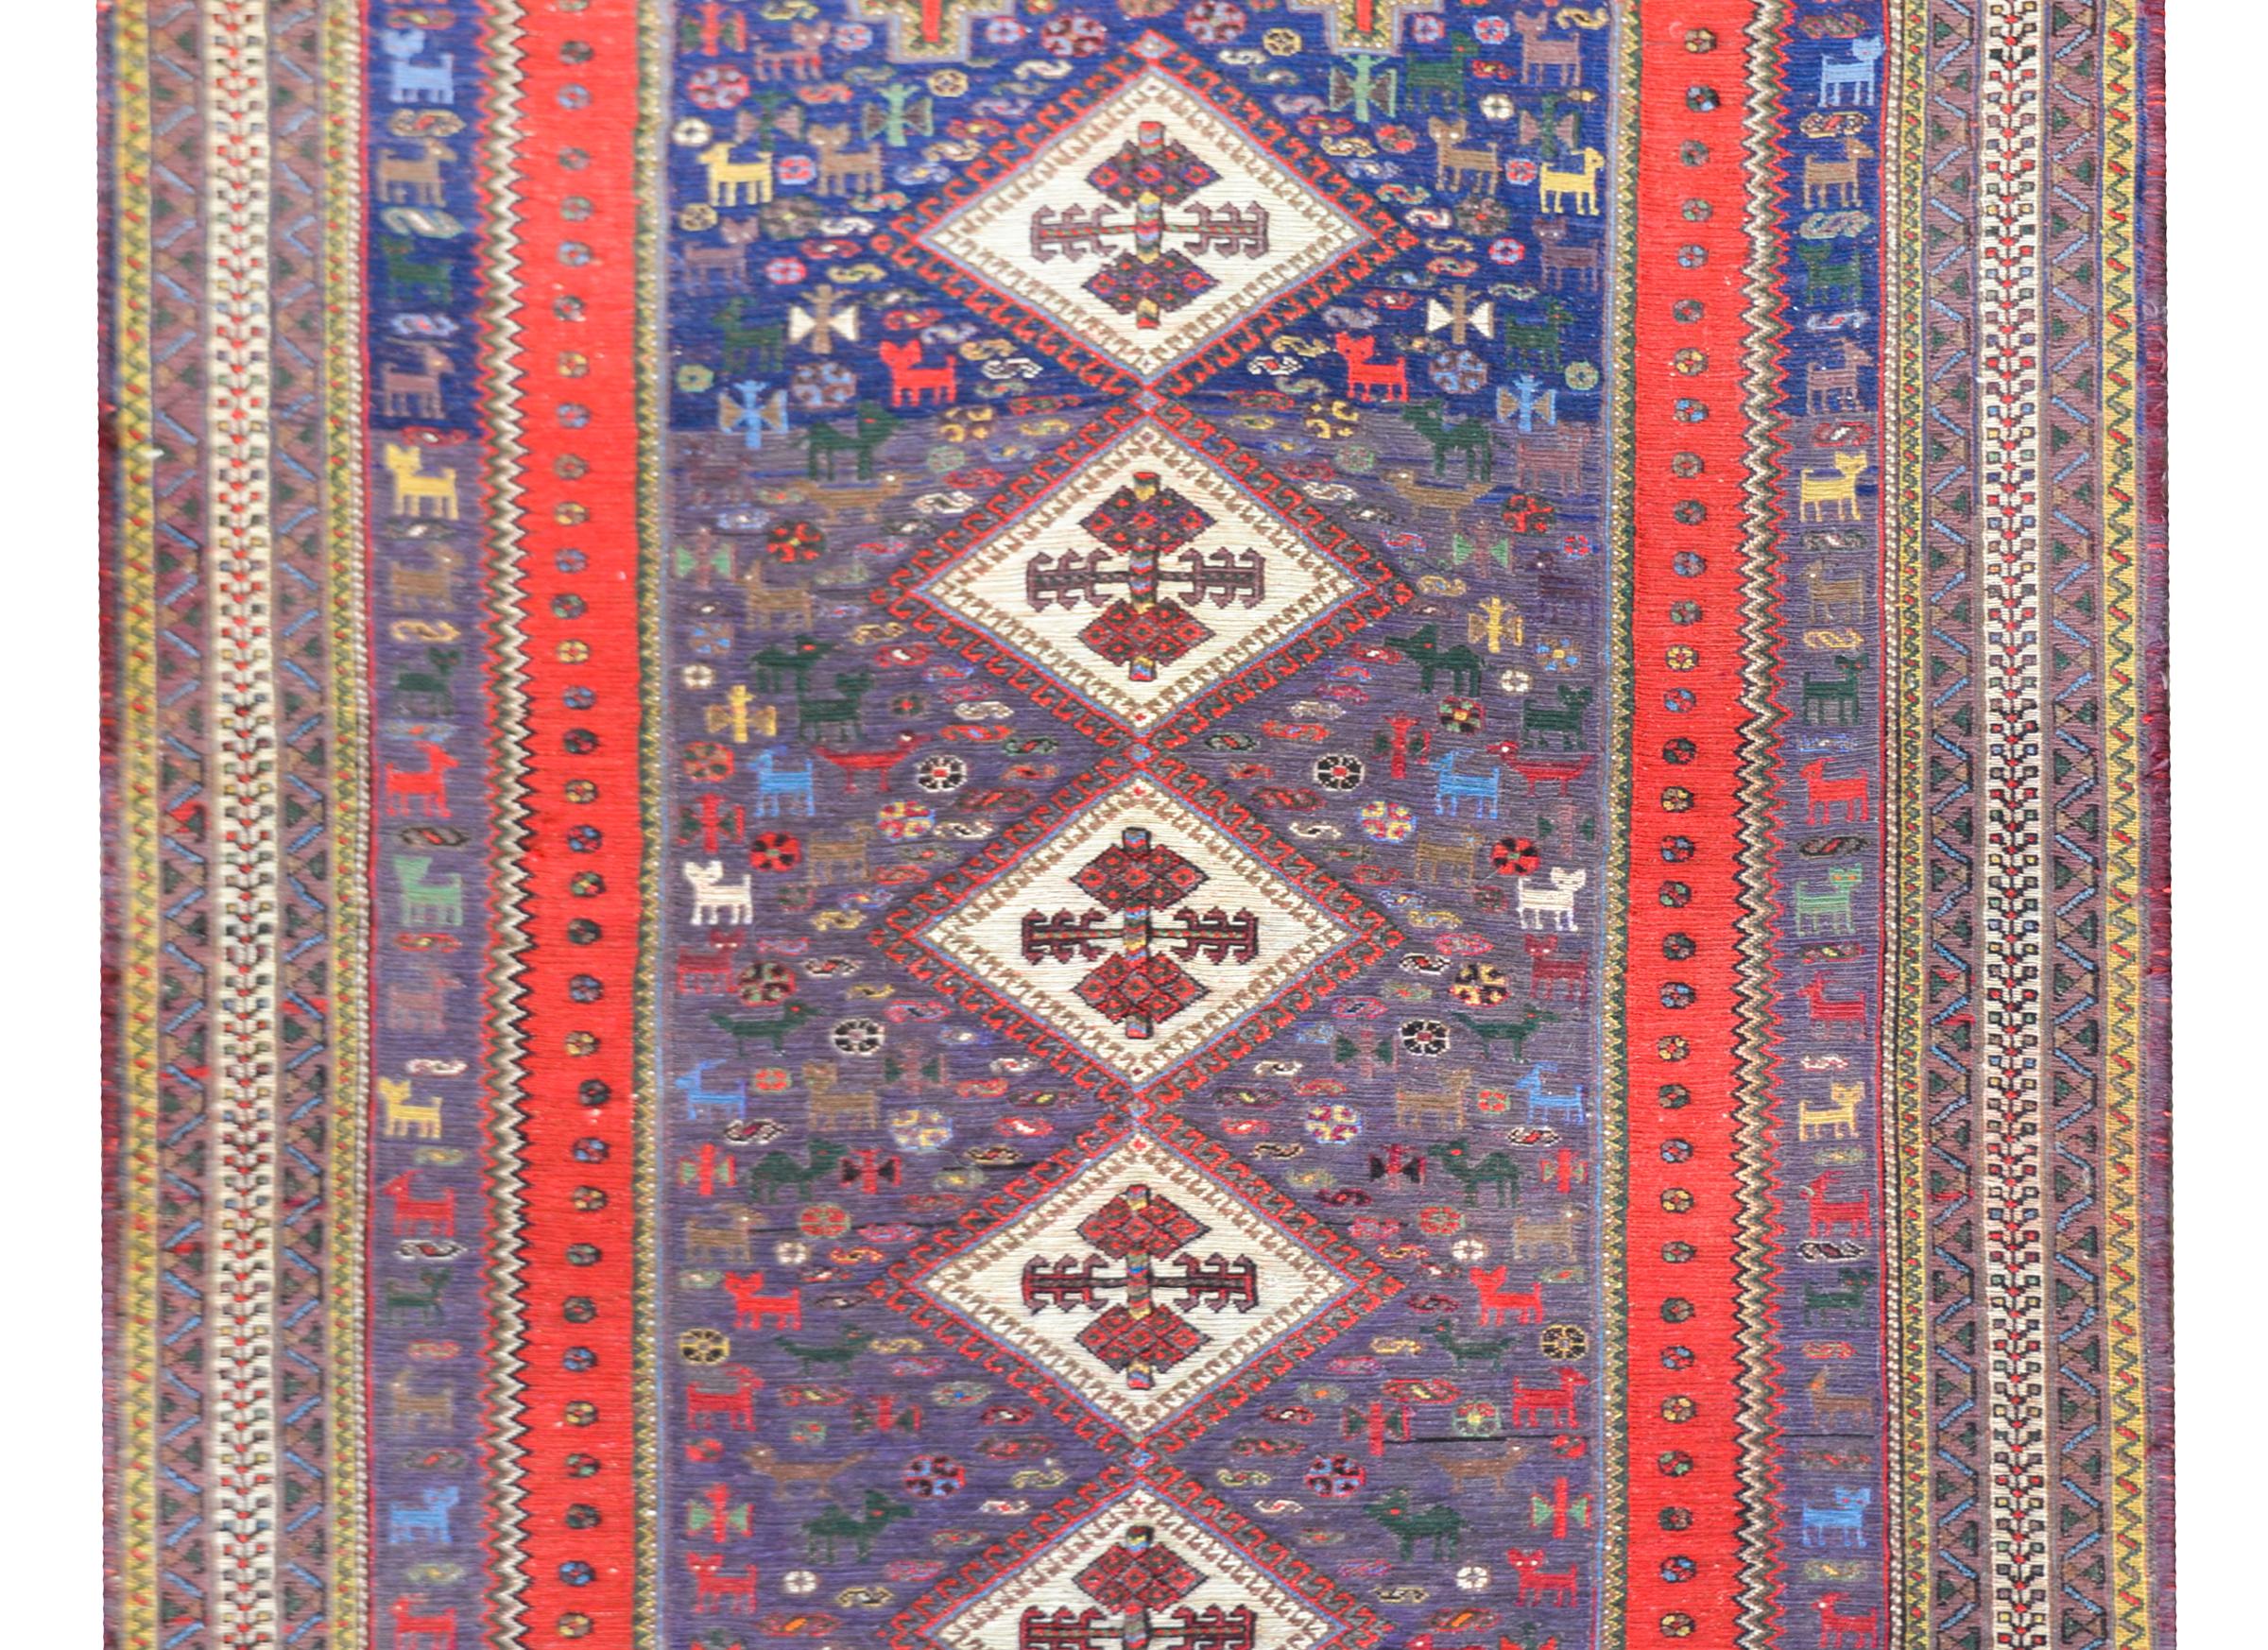 A wonderful mid-20th century Persian Sumak rug with five diamond medallions with stylized flowers, and living amidst a fantastically woven field of more stylized flowers and animals. The border is beautiful woven in several thin striped with petite